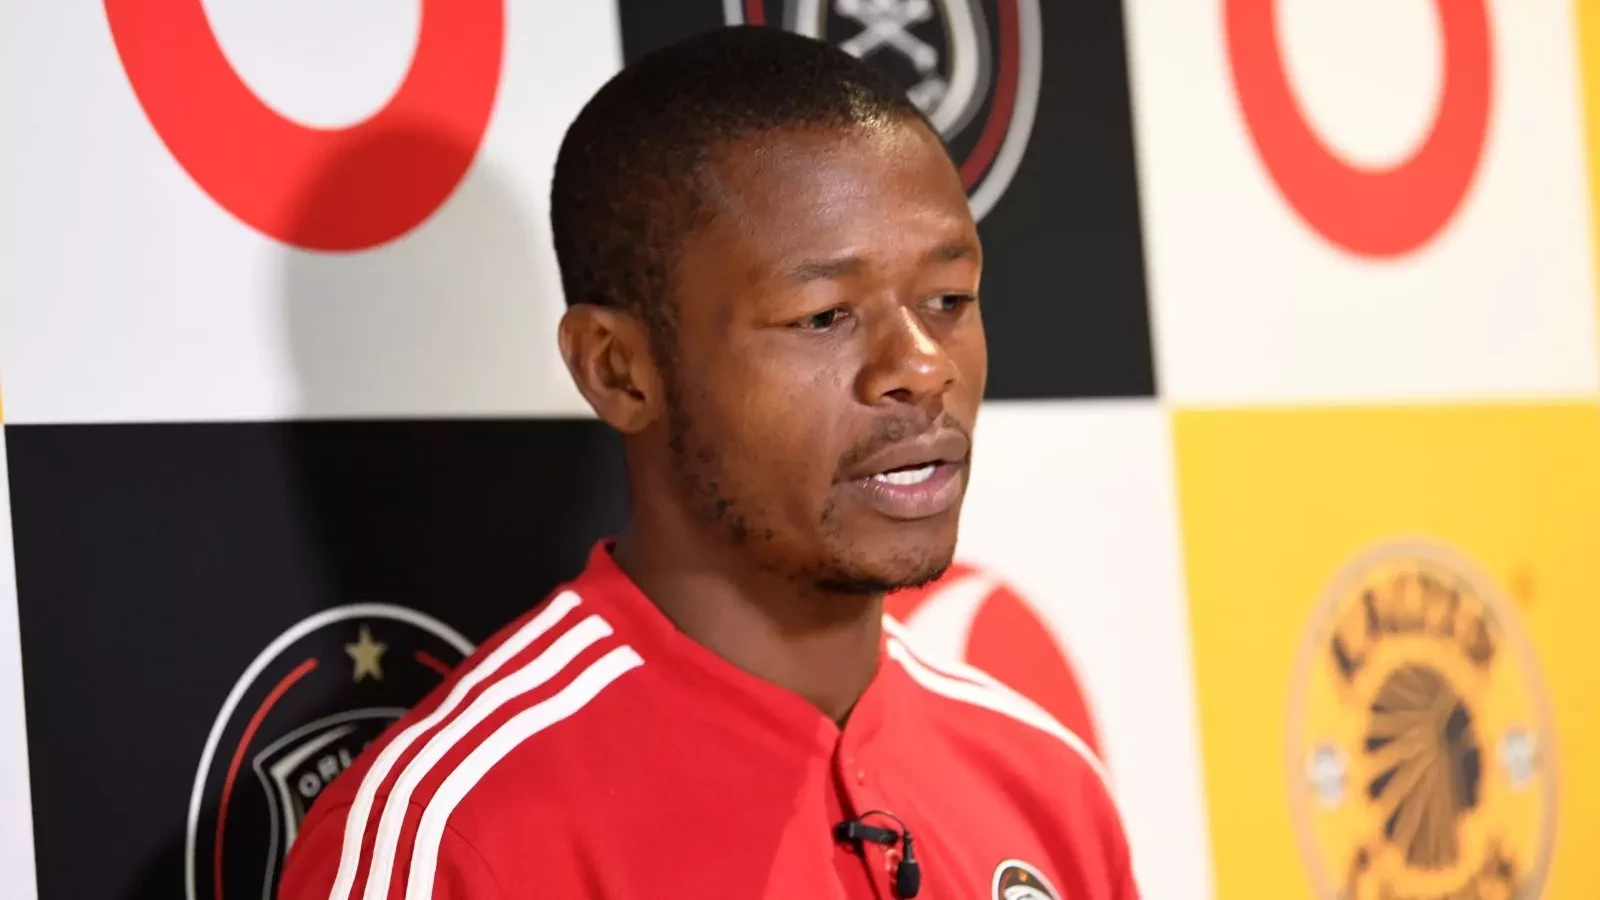 Carling Knockout Preview: Orlando Pirates Expected To See Off